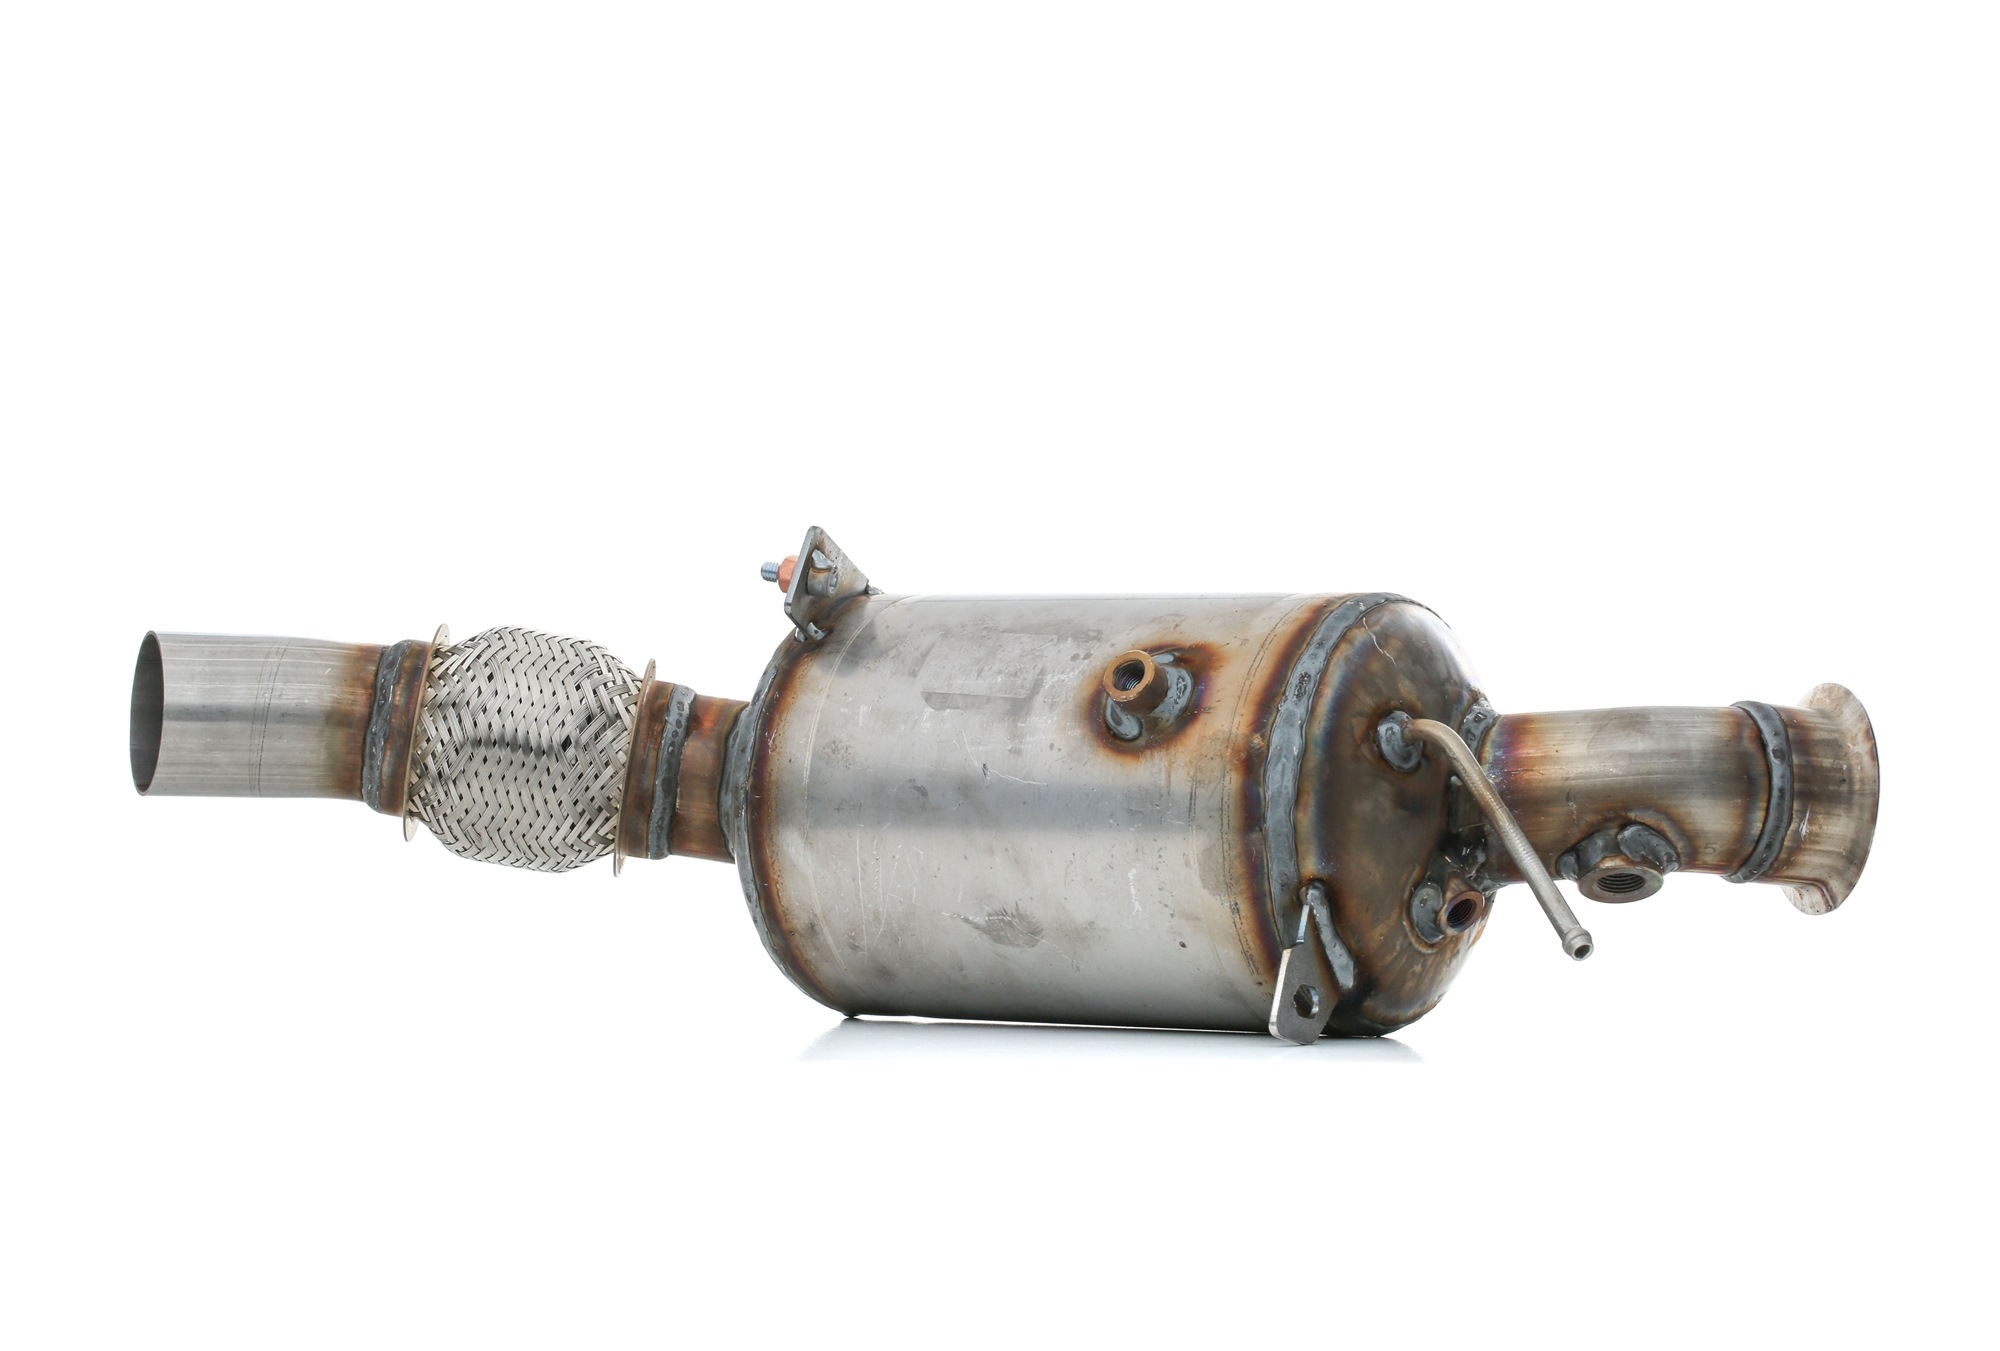 Original 1242 JMJ Diesel particulate filter experience and price